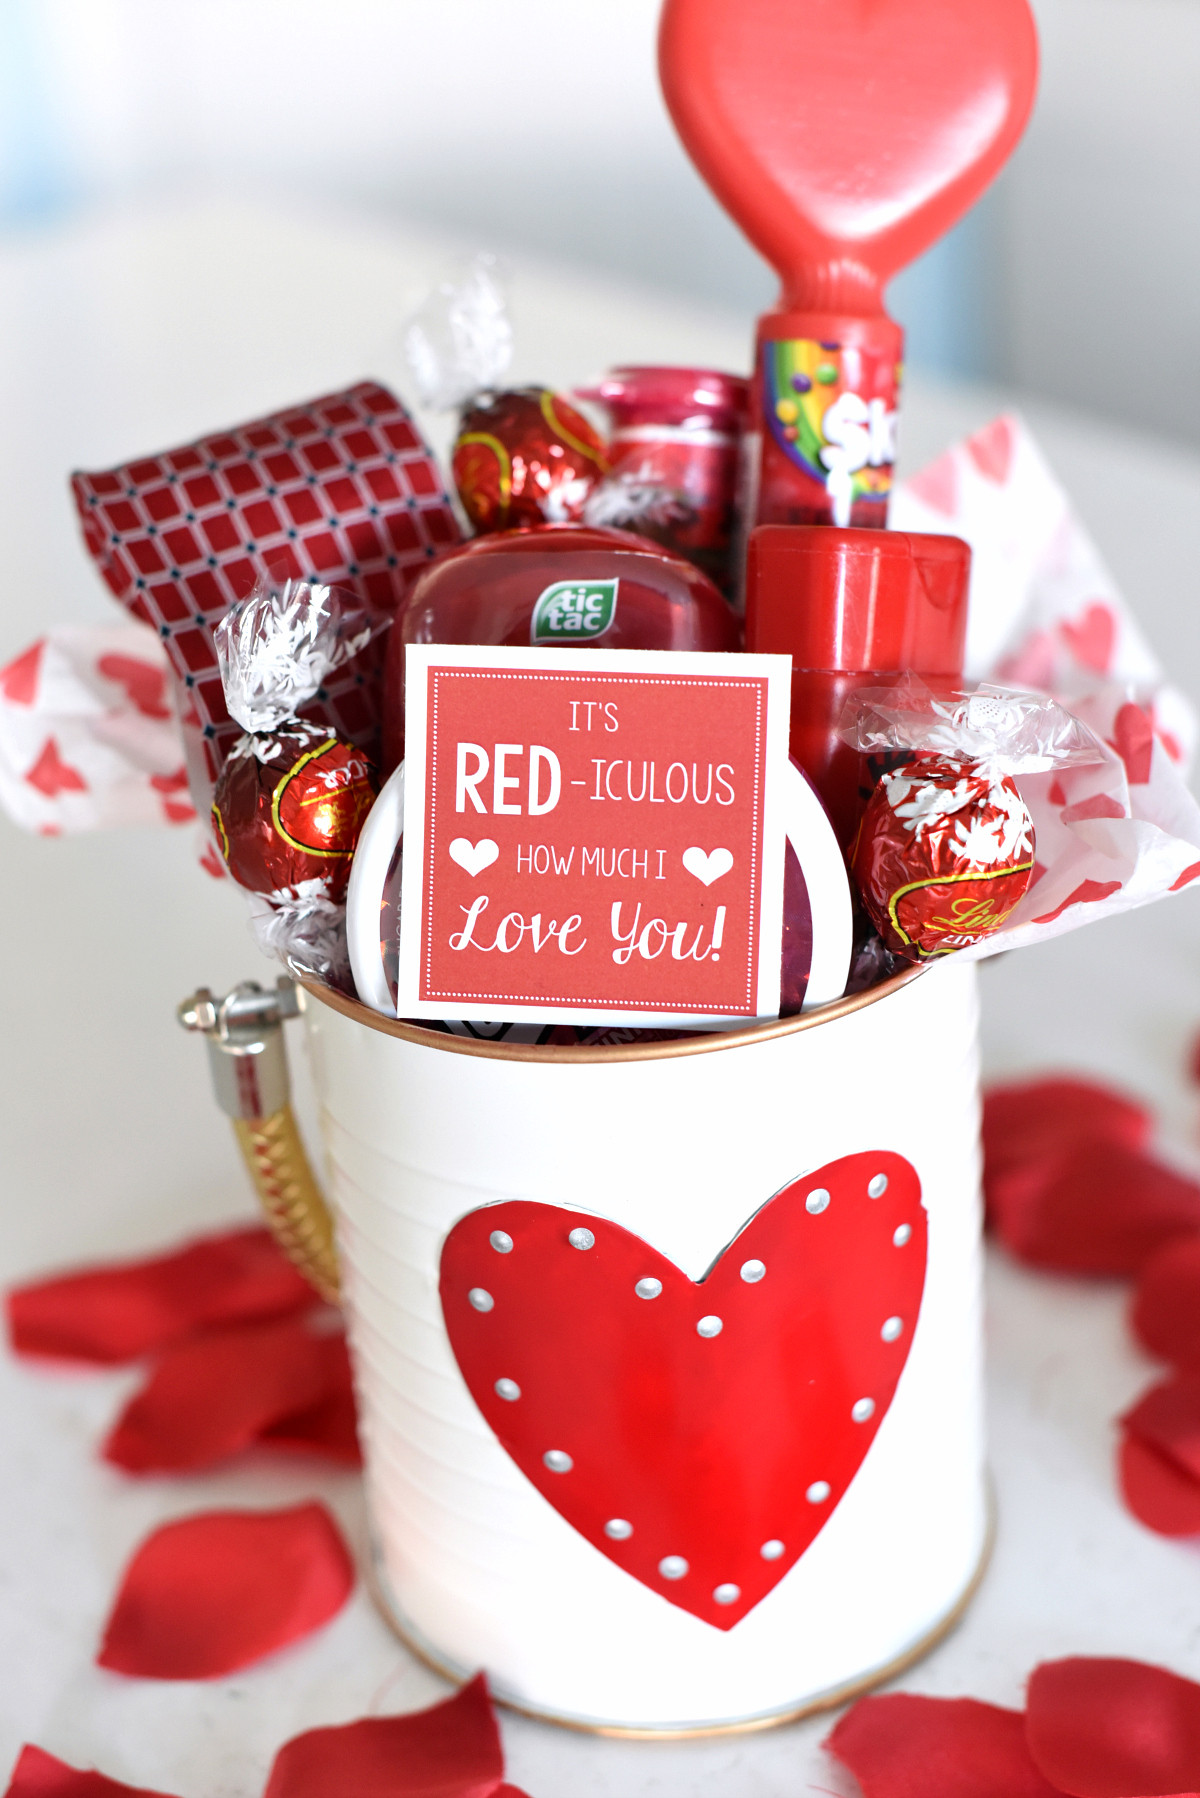 Unique Valentine Day Gift Ideas
 Fun Ways to Make Valentine s Day Special for Your Spouse